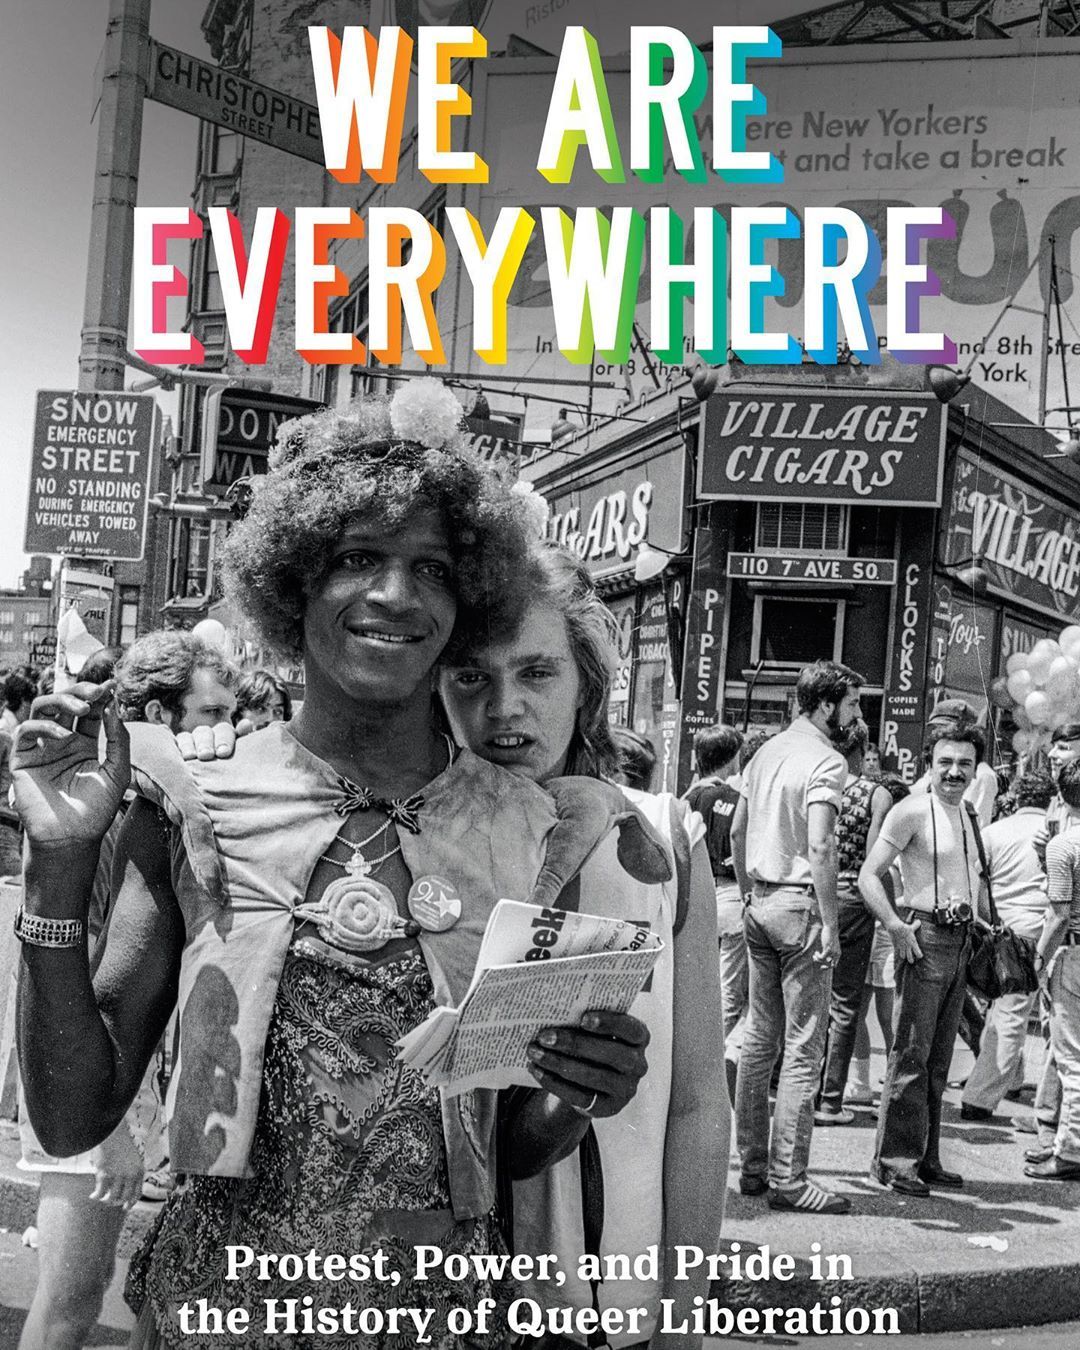 We’re major admirers of the @lgbt_history account and are thrilled over the news that their new book “We Are Everywhere” is now available. In celebration and solidarity, were giving away five copies of this amazing visual account of Queer...